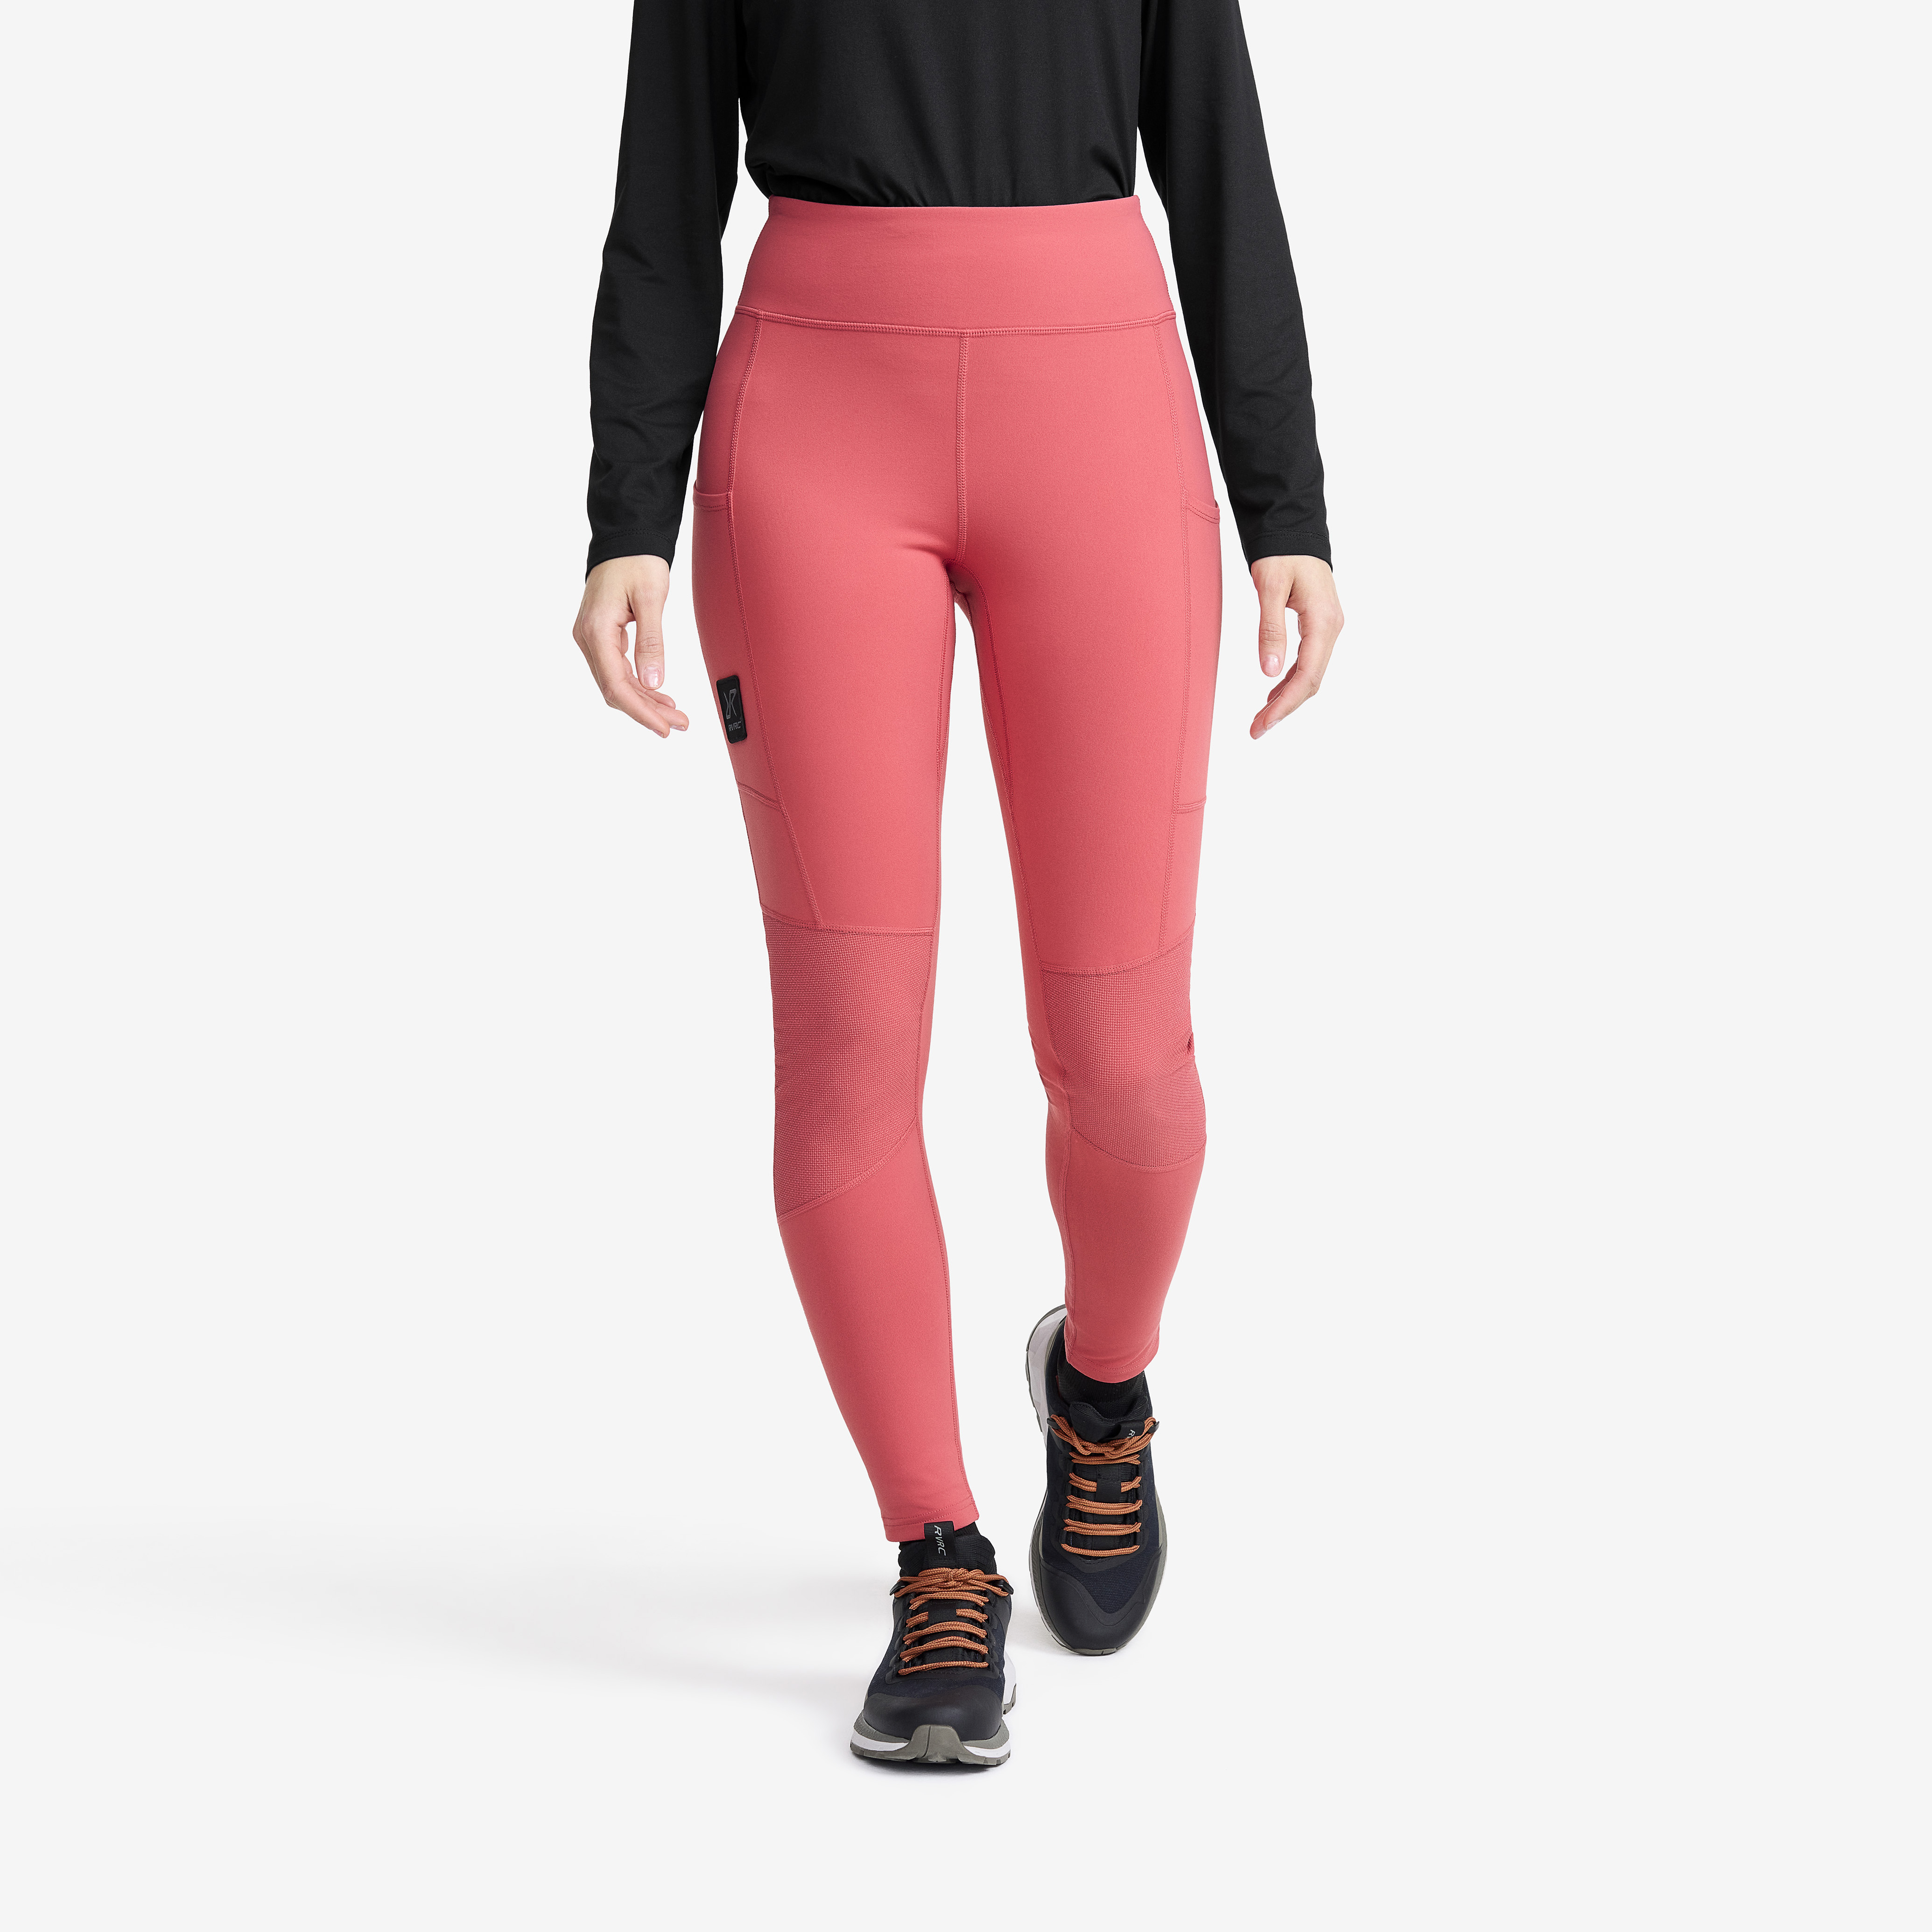 Summit Core Tights – Dam – Holly Berry Storlek:L – Outdoor Tights